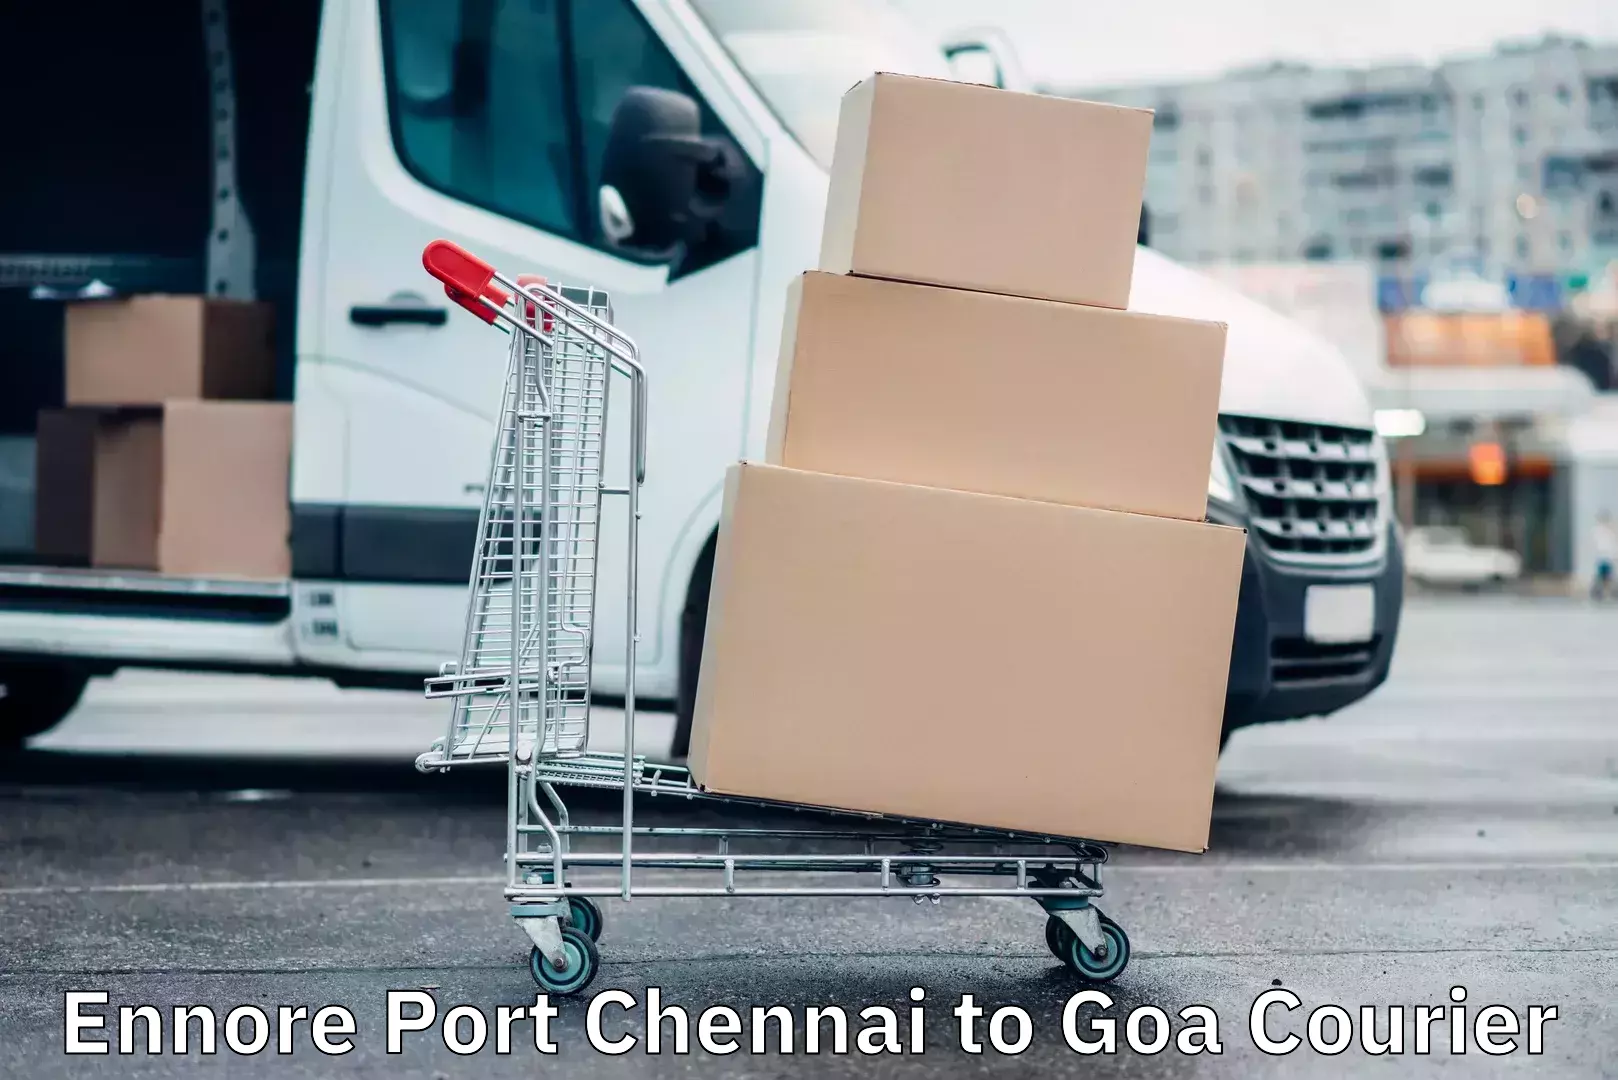 Global courier networks Ennore Port Chennai to Goa